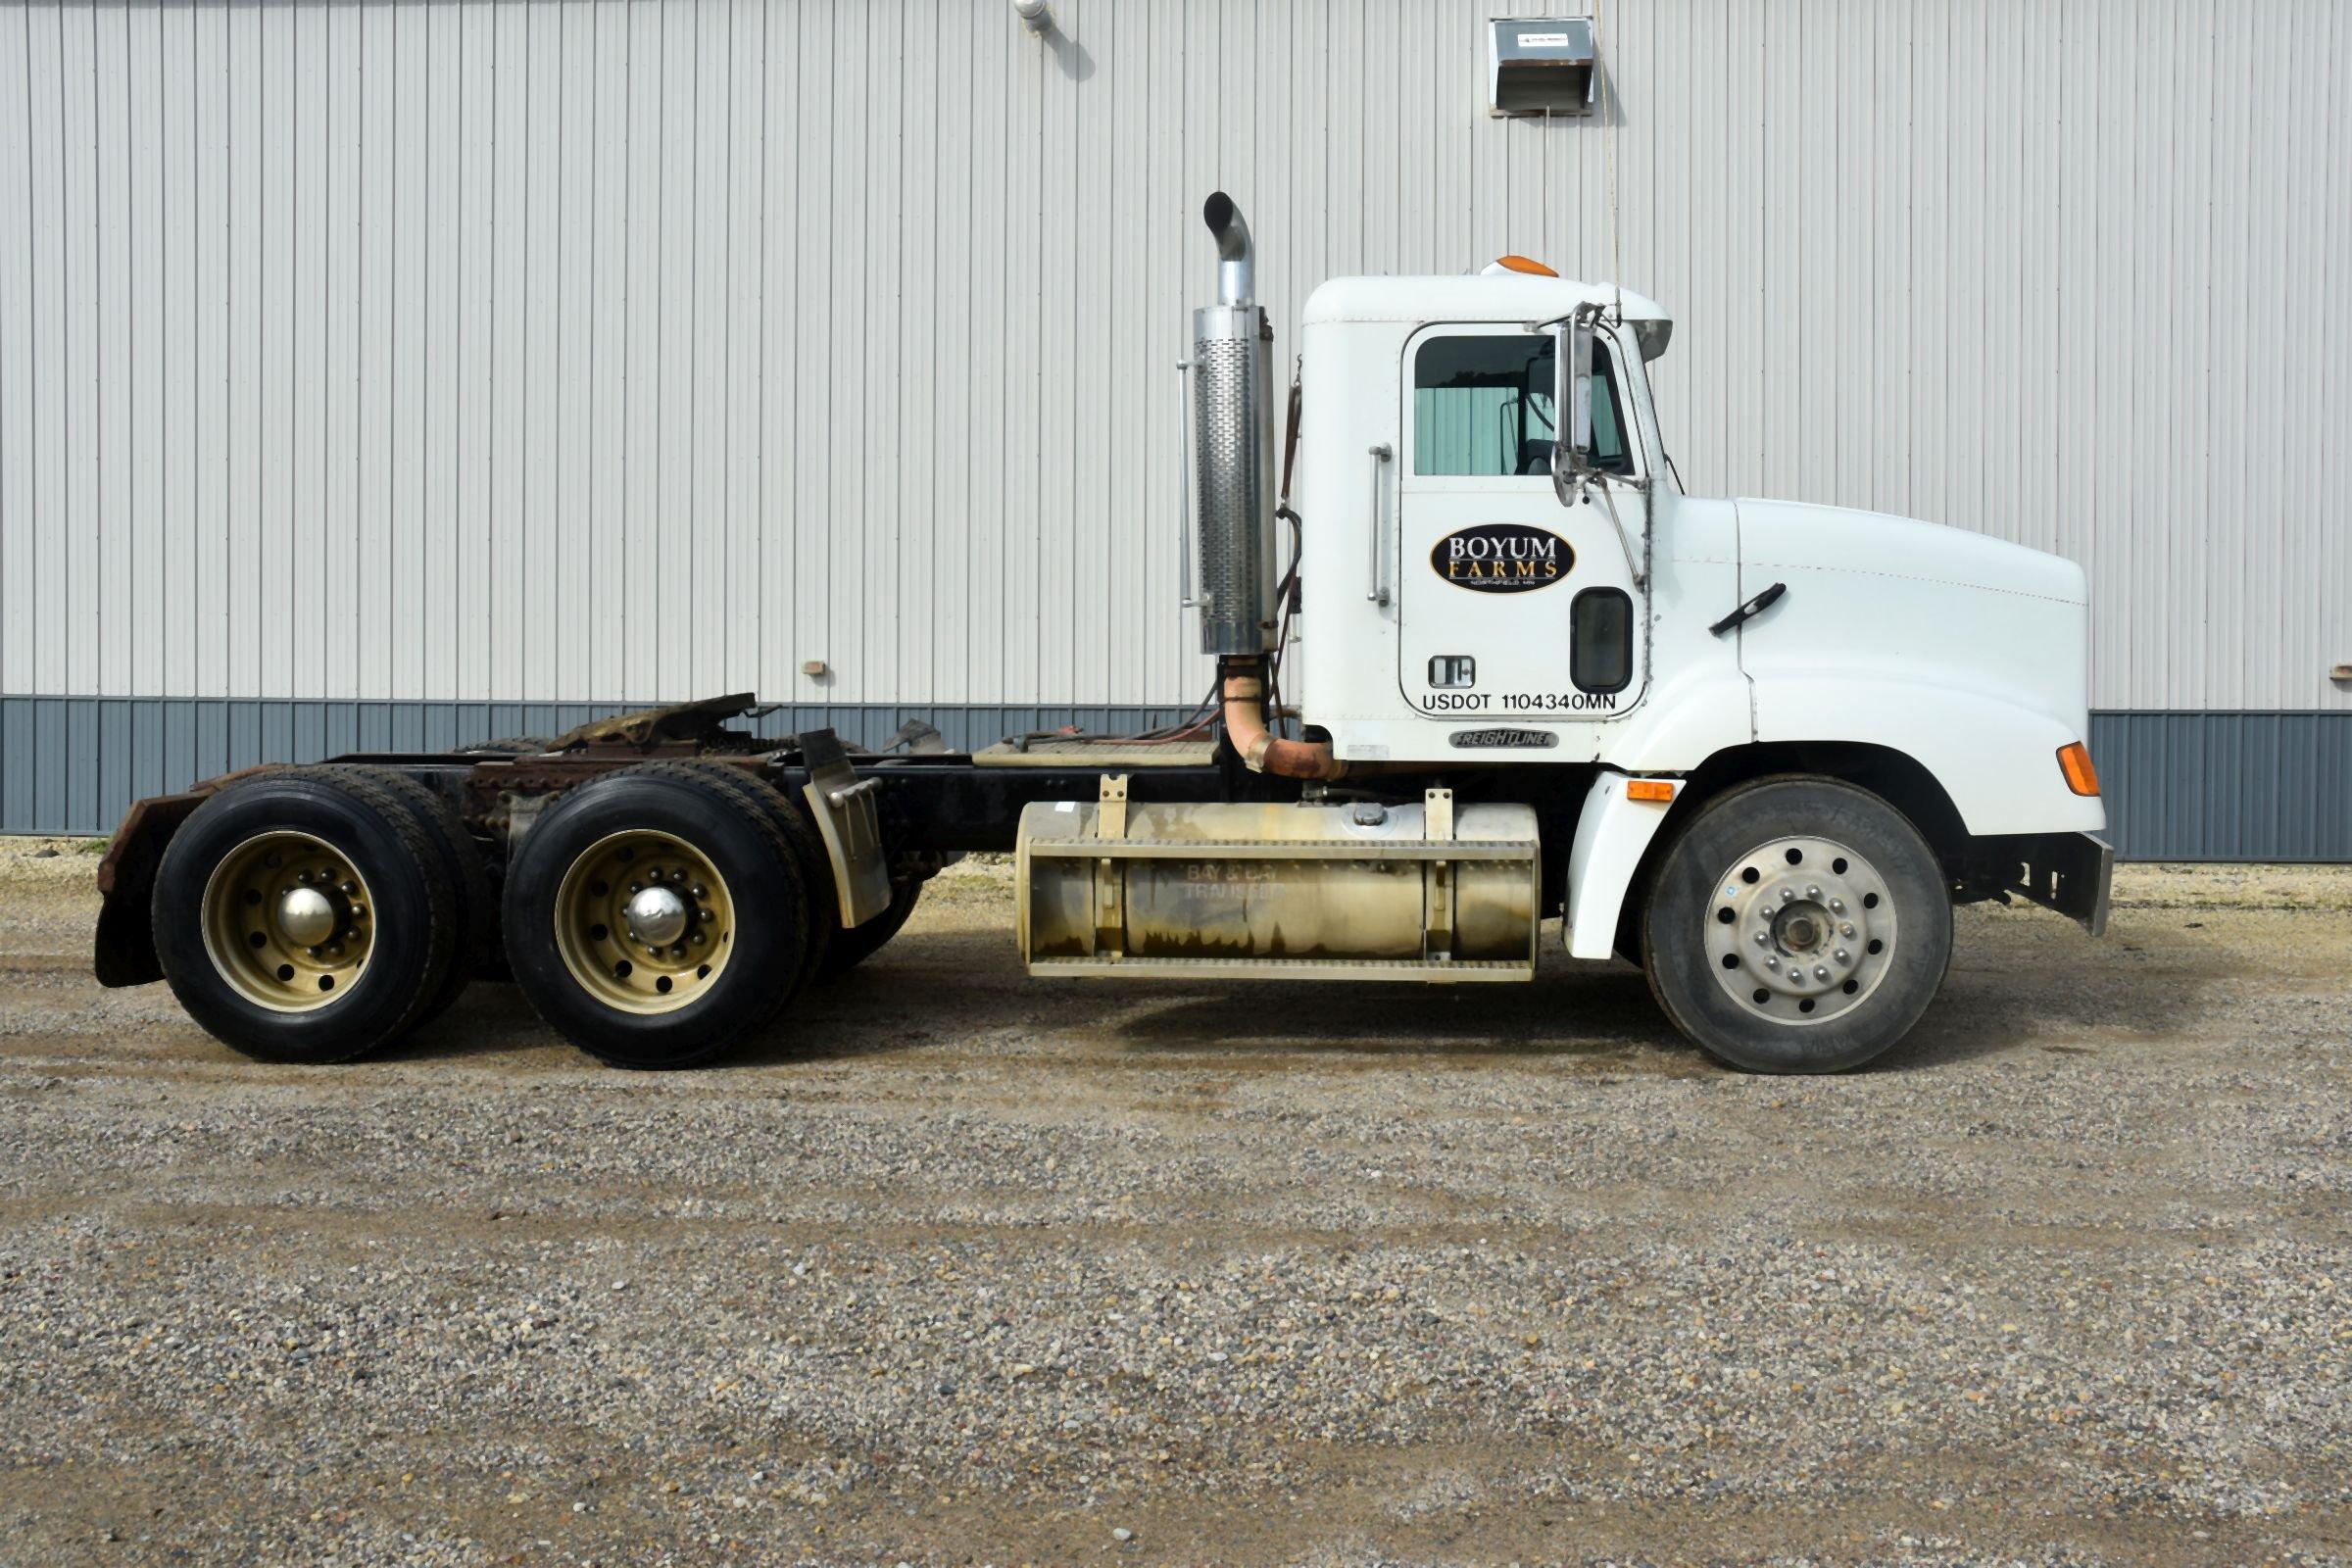 1996 Freightliner Day Cab, M-11 Cummins, Differential Lock, 9 Speed, Air Ride, PTO, 22.5 Rubber, 665